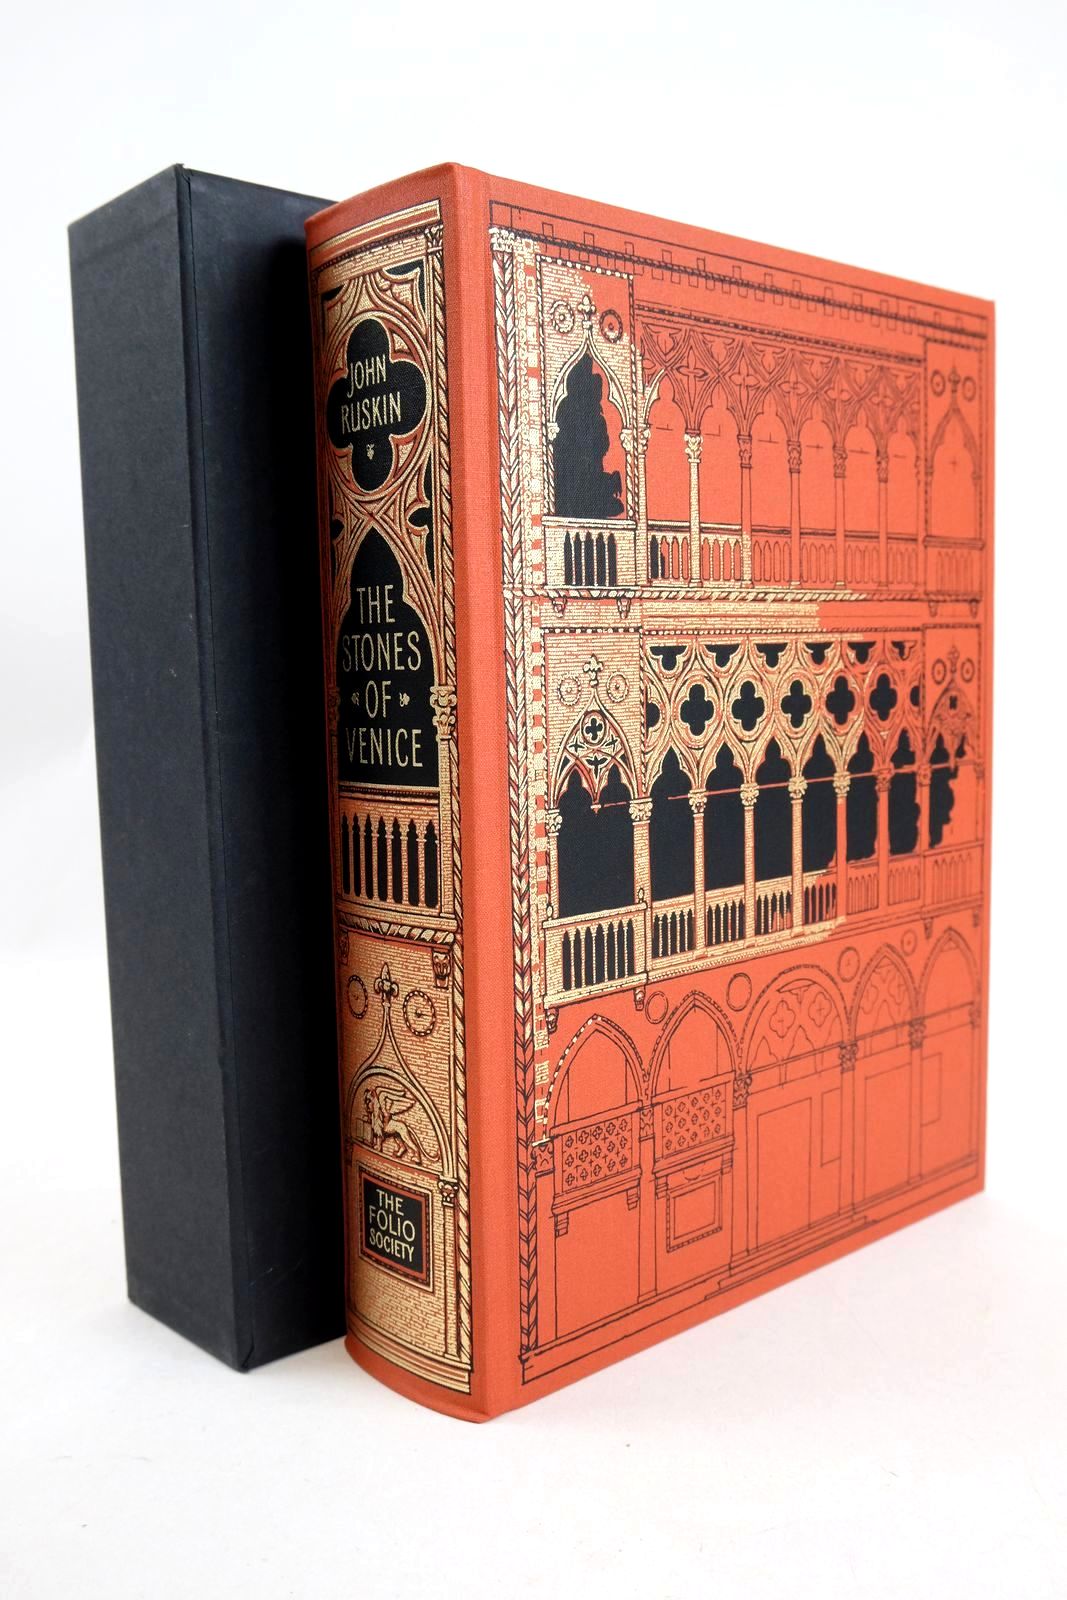 Photo of THE STONES OF VENICE written by Ruskin, John Morris, Jan illustrated by Ruskin, John published by Folio Society (STOCK CODE: 1327600)  for sale by Stella & Rose's Books